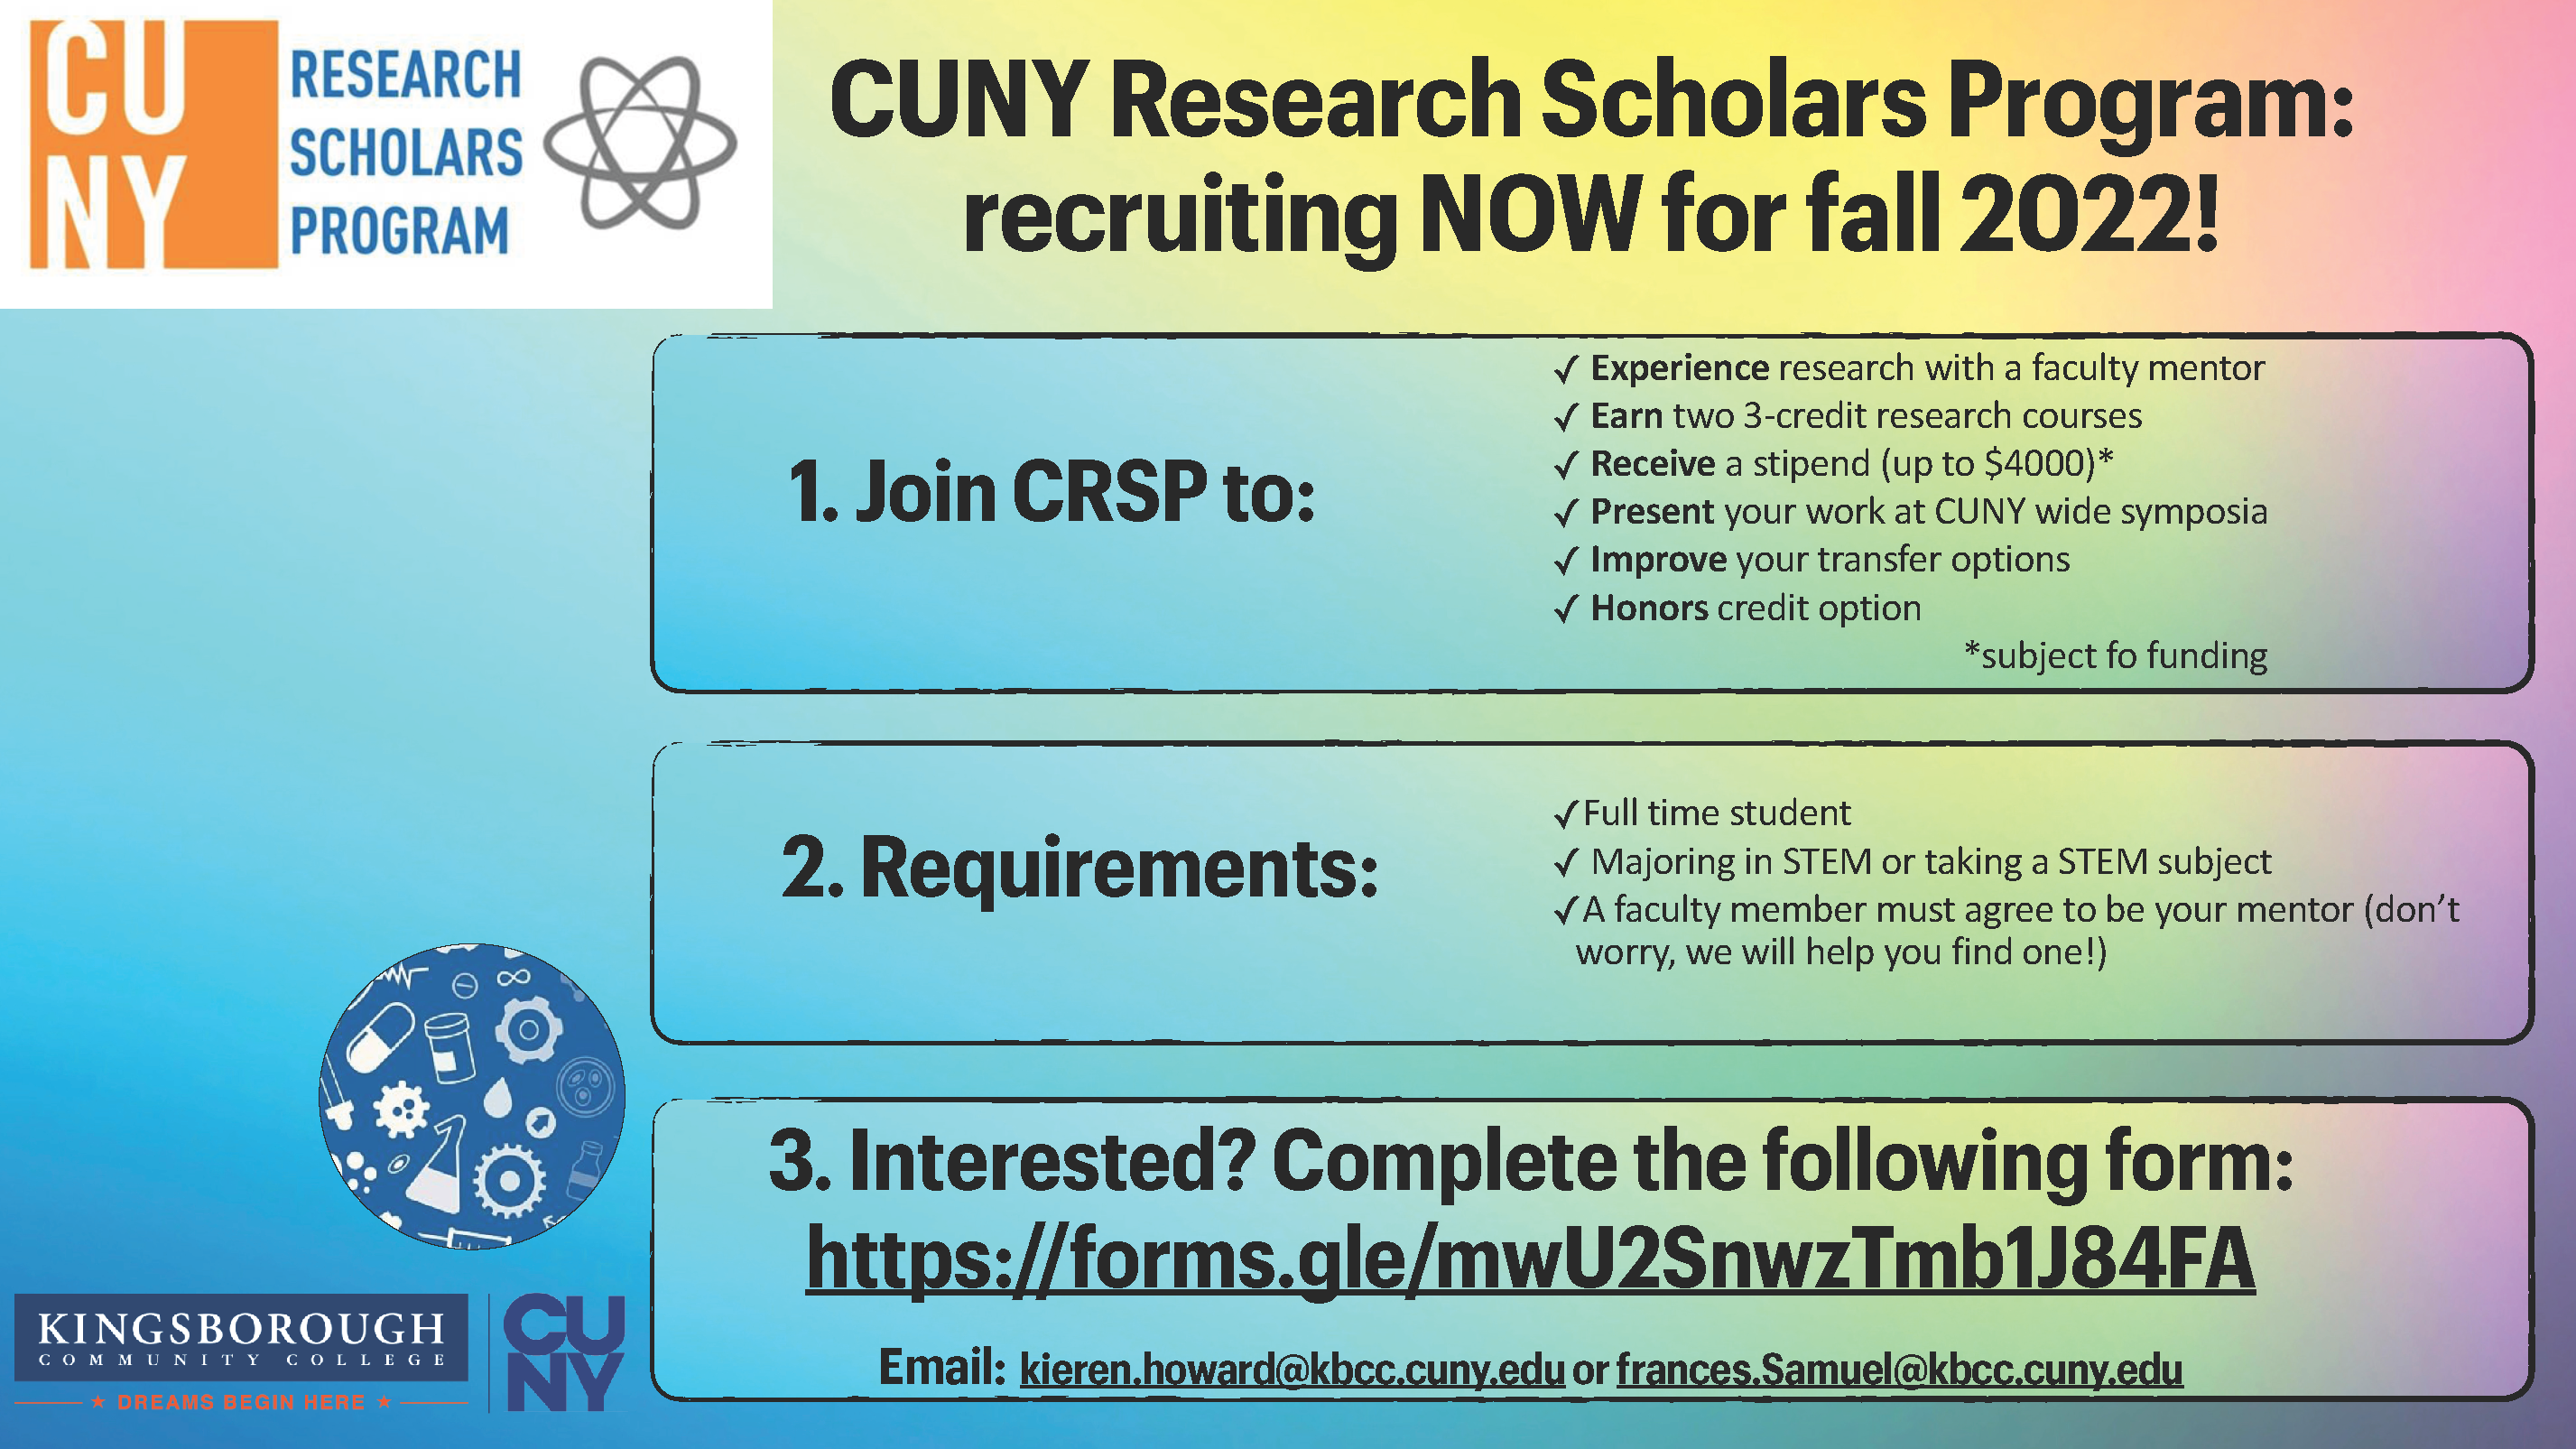 CUNY Research Scholars Program: recruiting NOW for fall 2022!